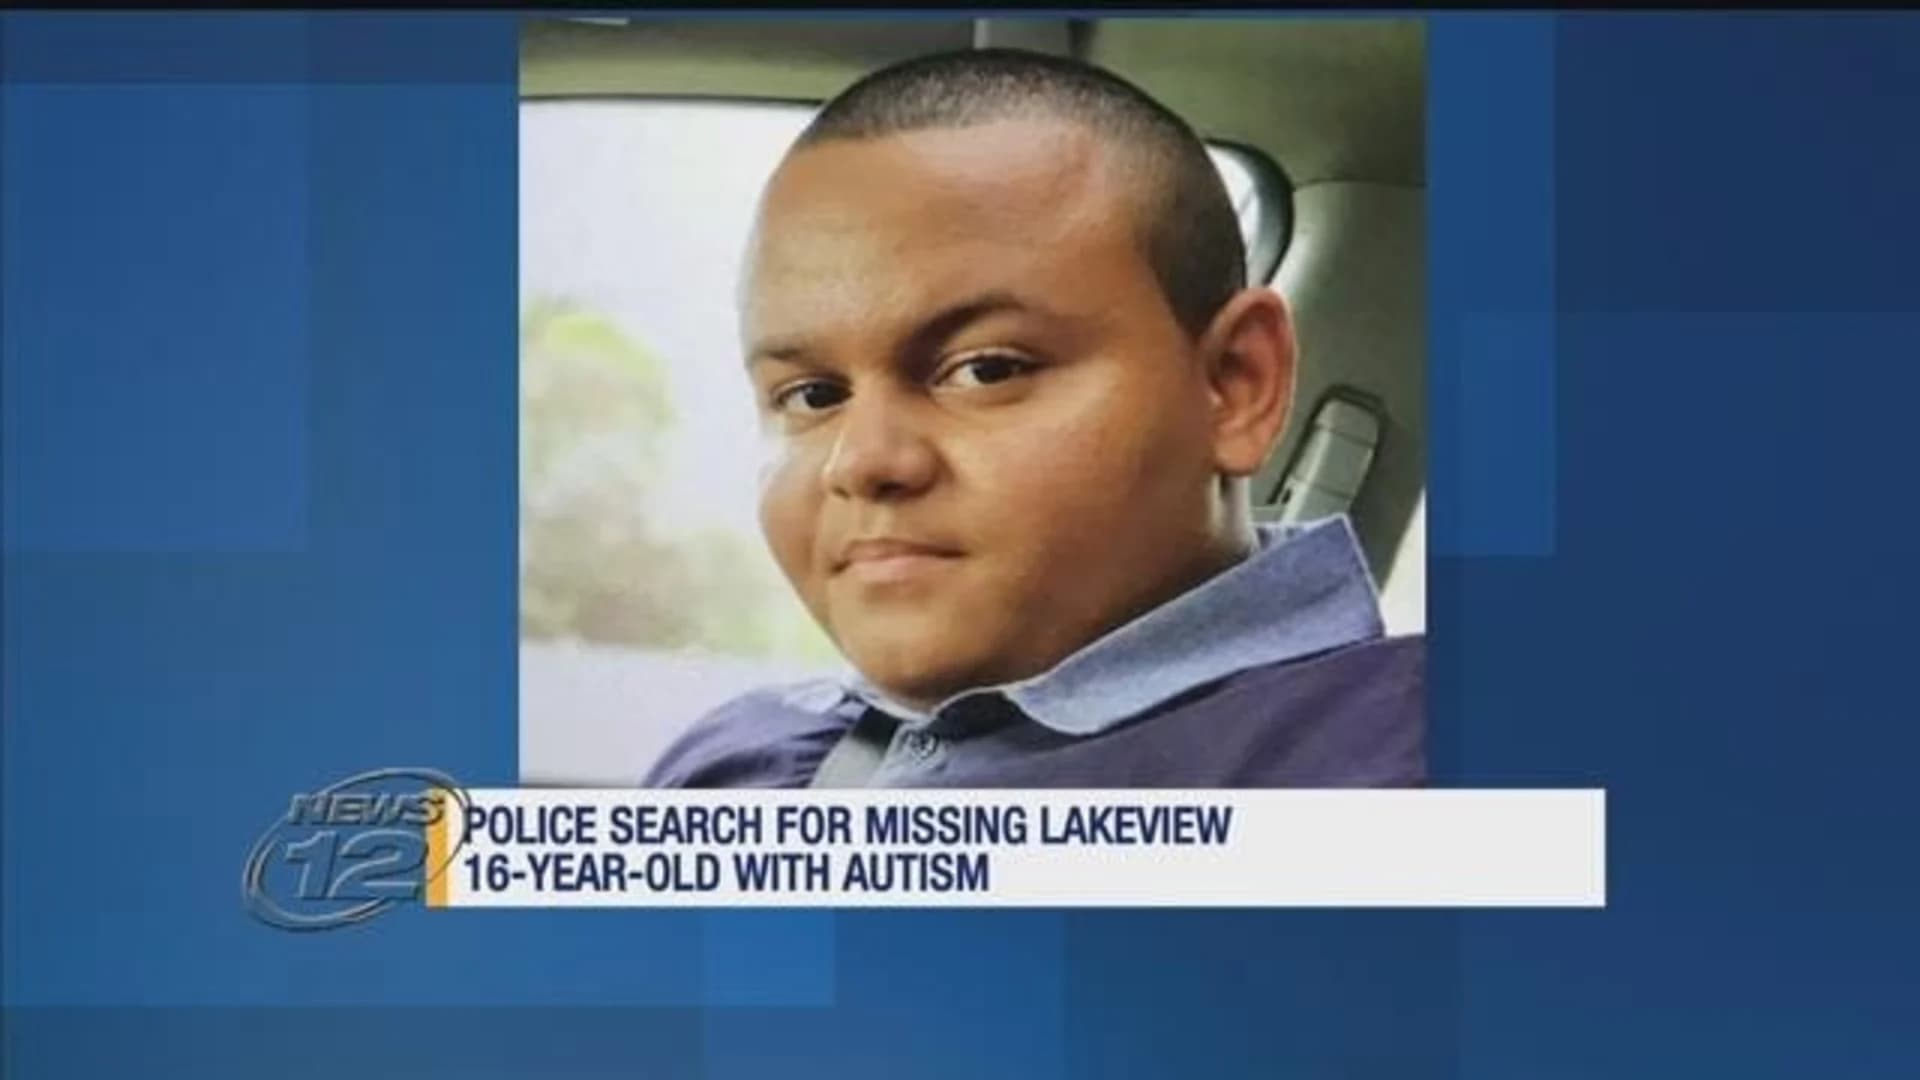 Police: Autistic teen missing from Lakeview found